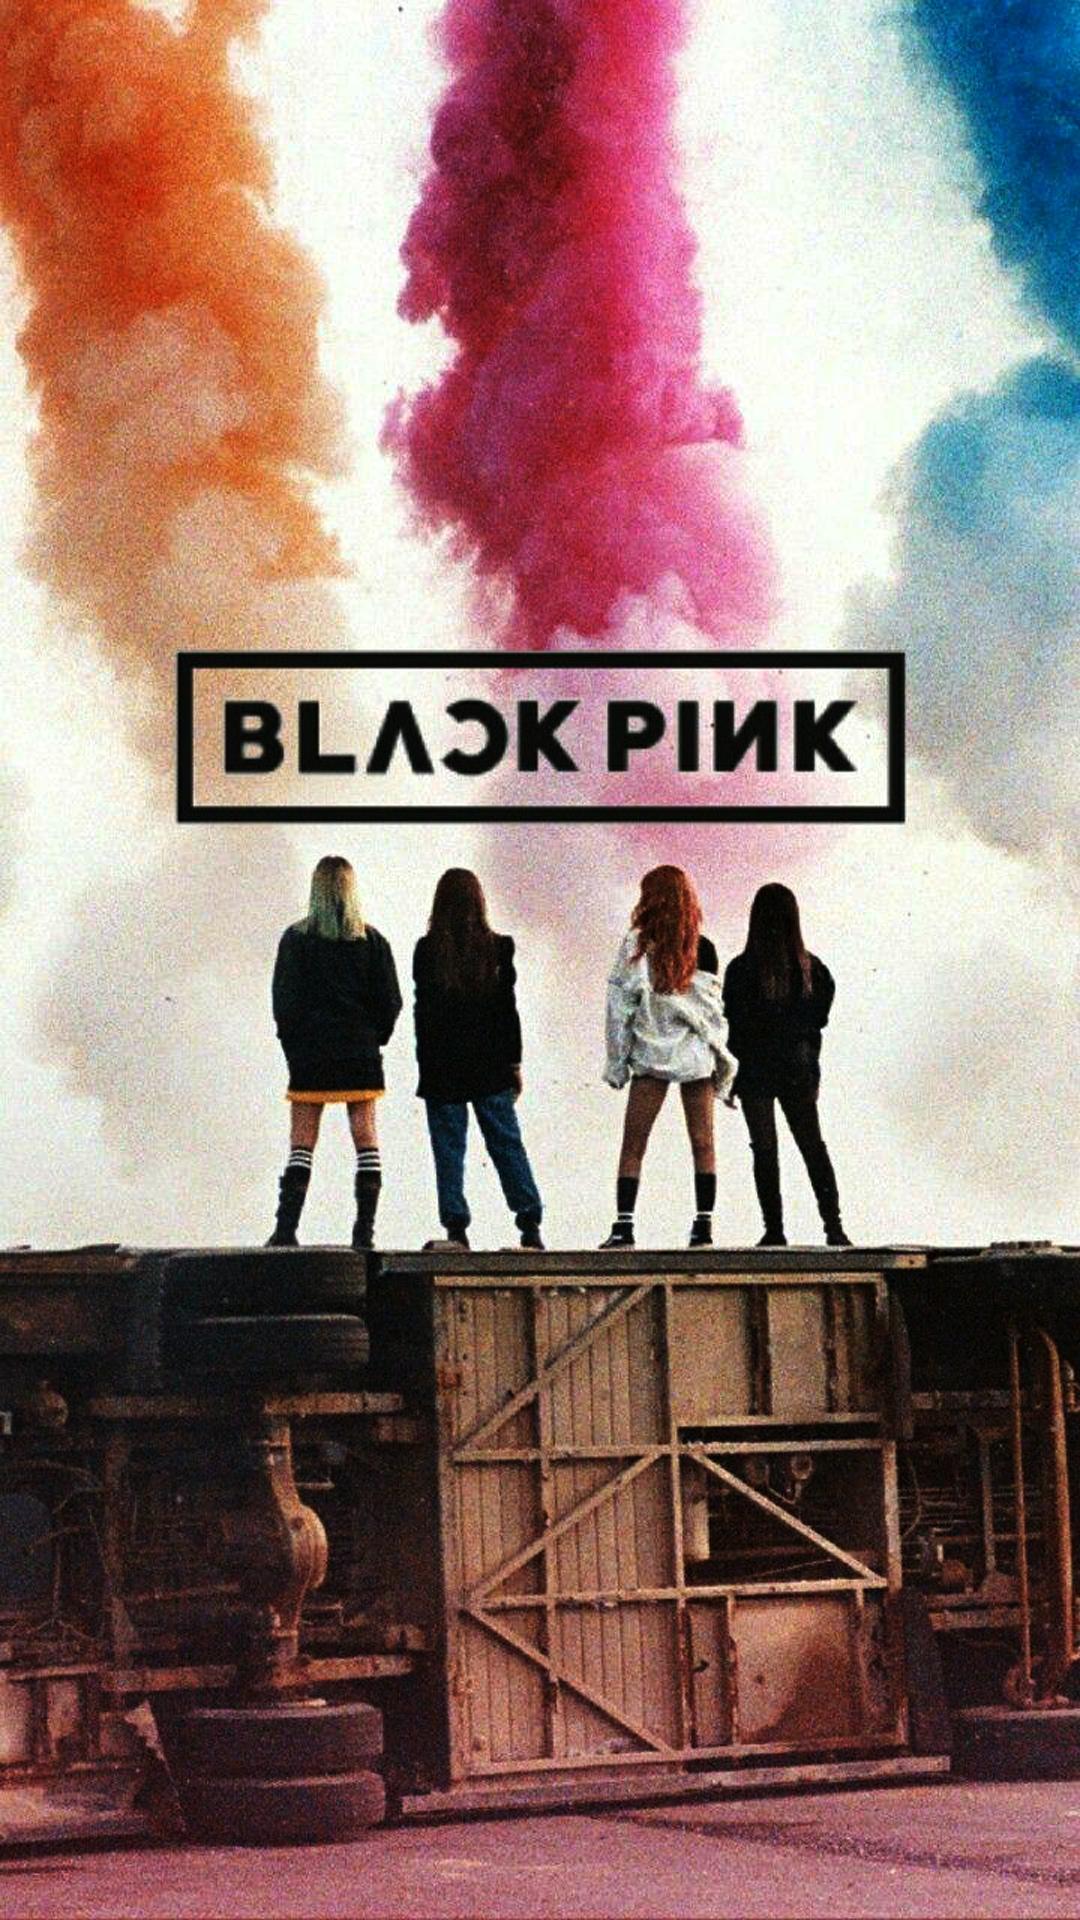 Blackpink Wallpaper 2021 HD Quality for Android